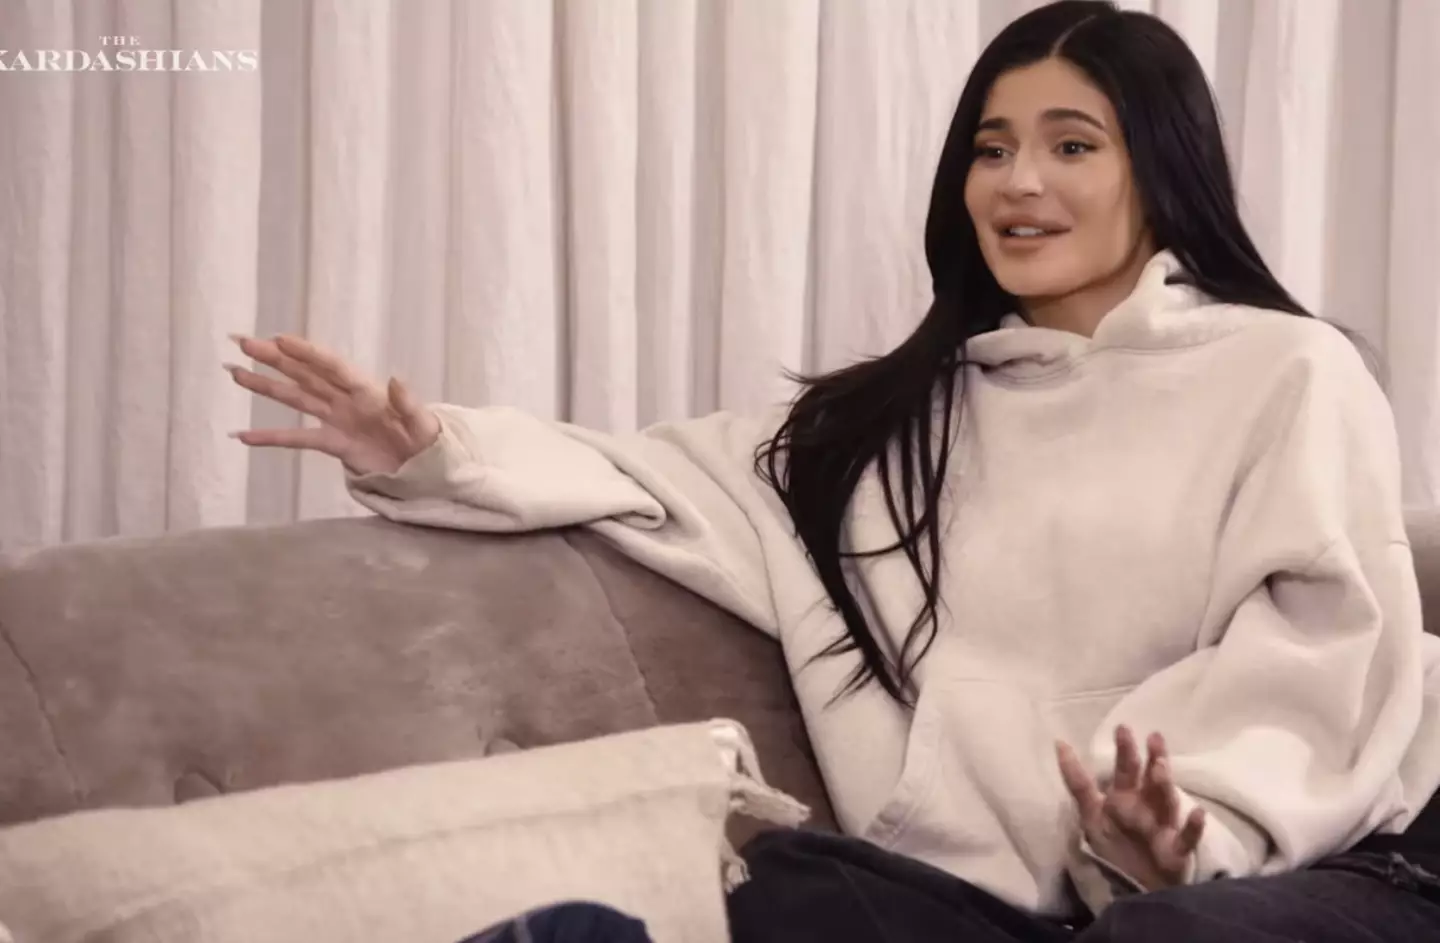 Kylie says her sisters made her feel insecure about her ears.